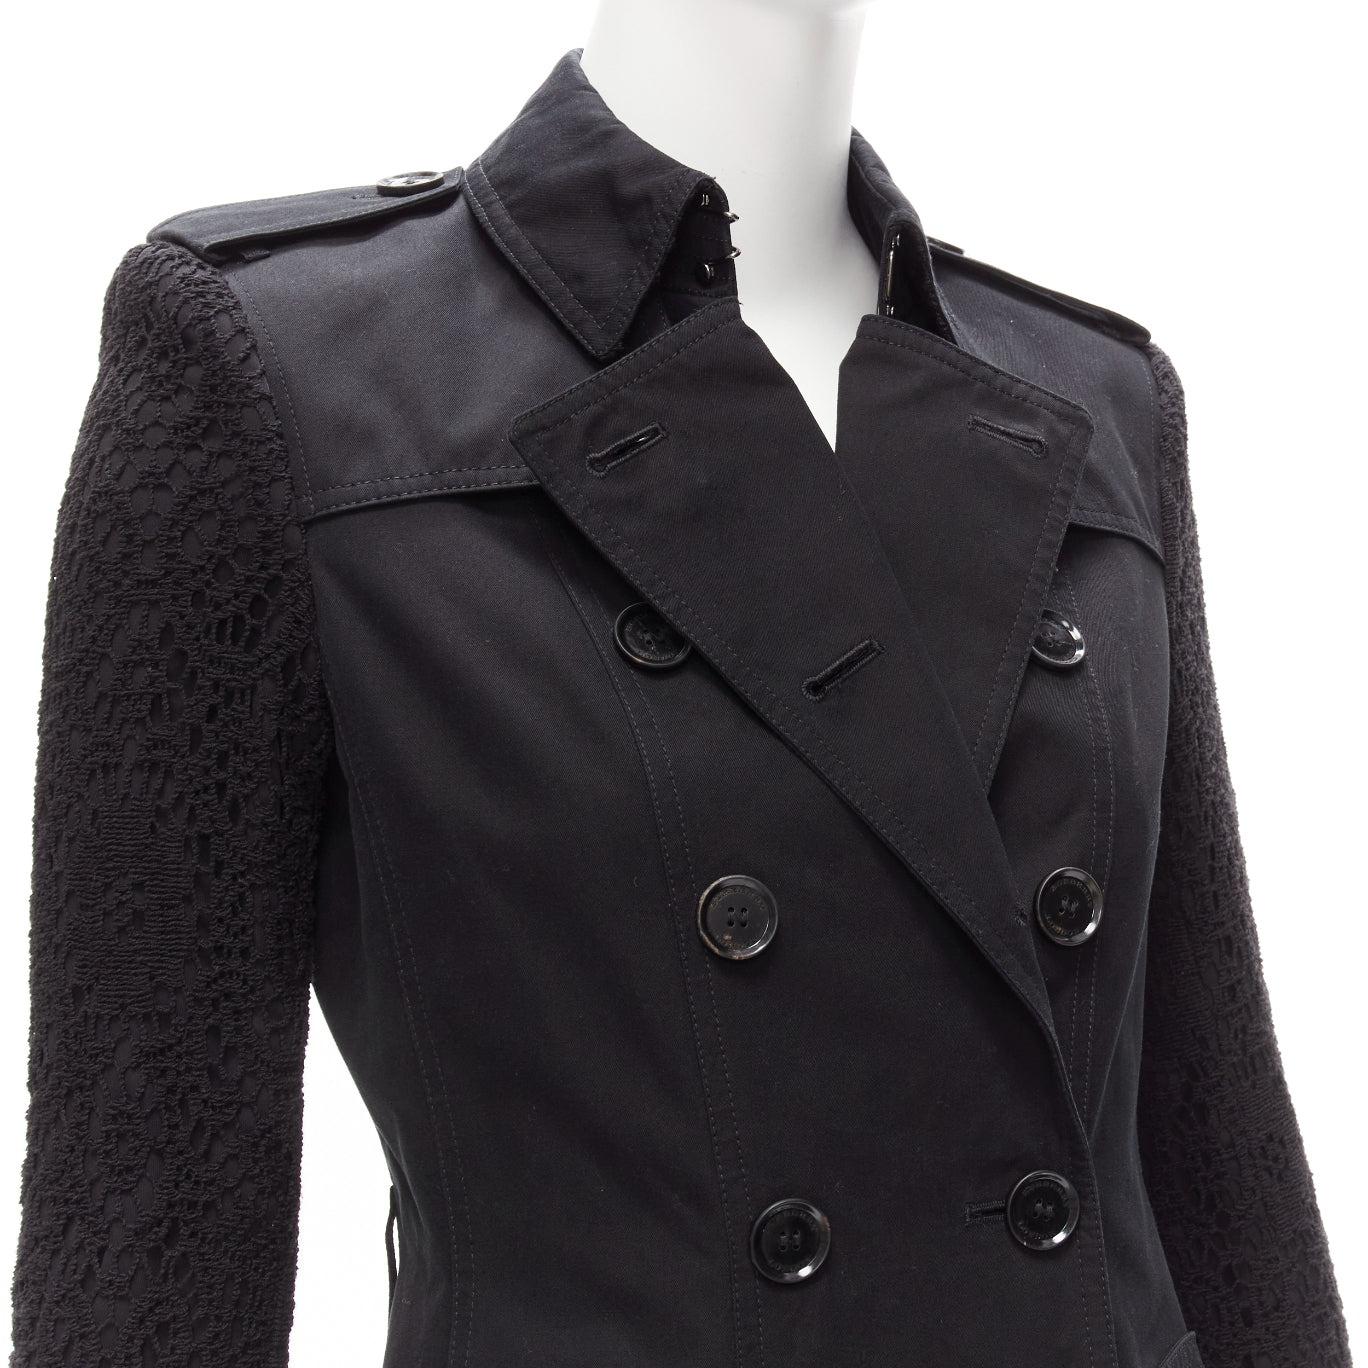 BURBERRY black cotton lace sleeve double breasted trench coat UK6 XS
Reference: TGAS/D00837
Brand: Burberry
Designer: Christopher Bailey
Material: Cotton
Color: Black
Pattern: Solid
Closure: Button
Lining: Black Fabric
Extra Details: Missing belt